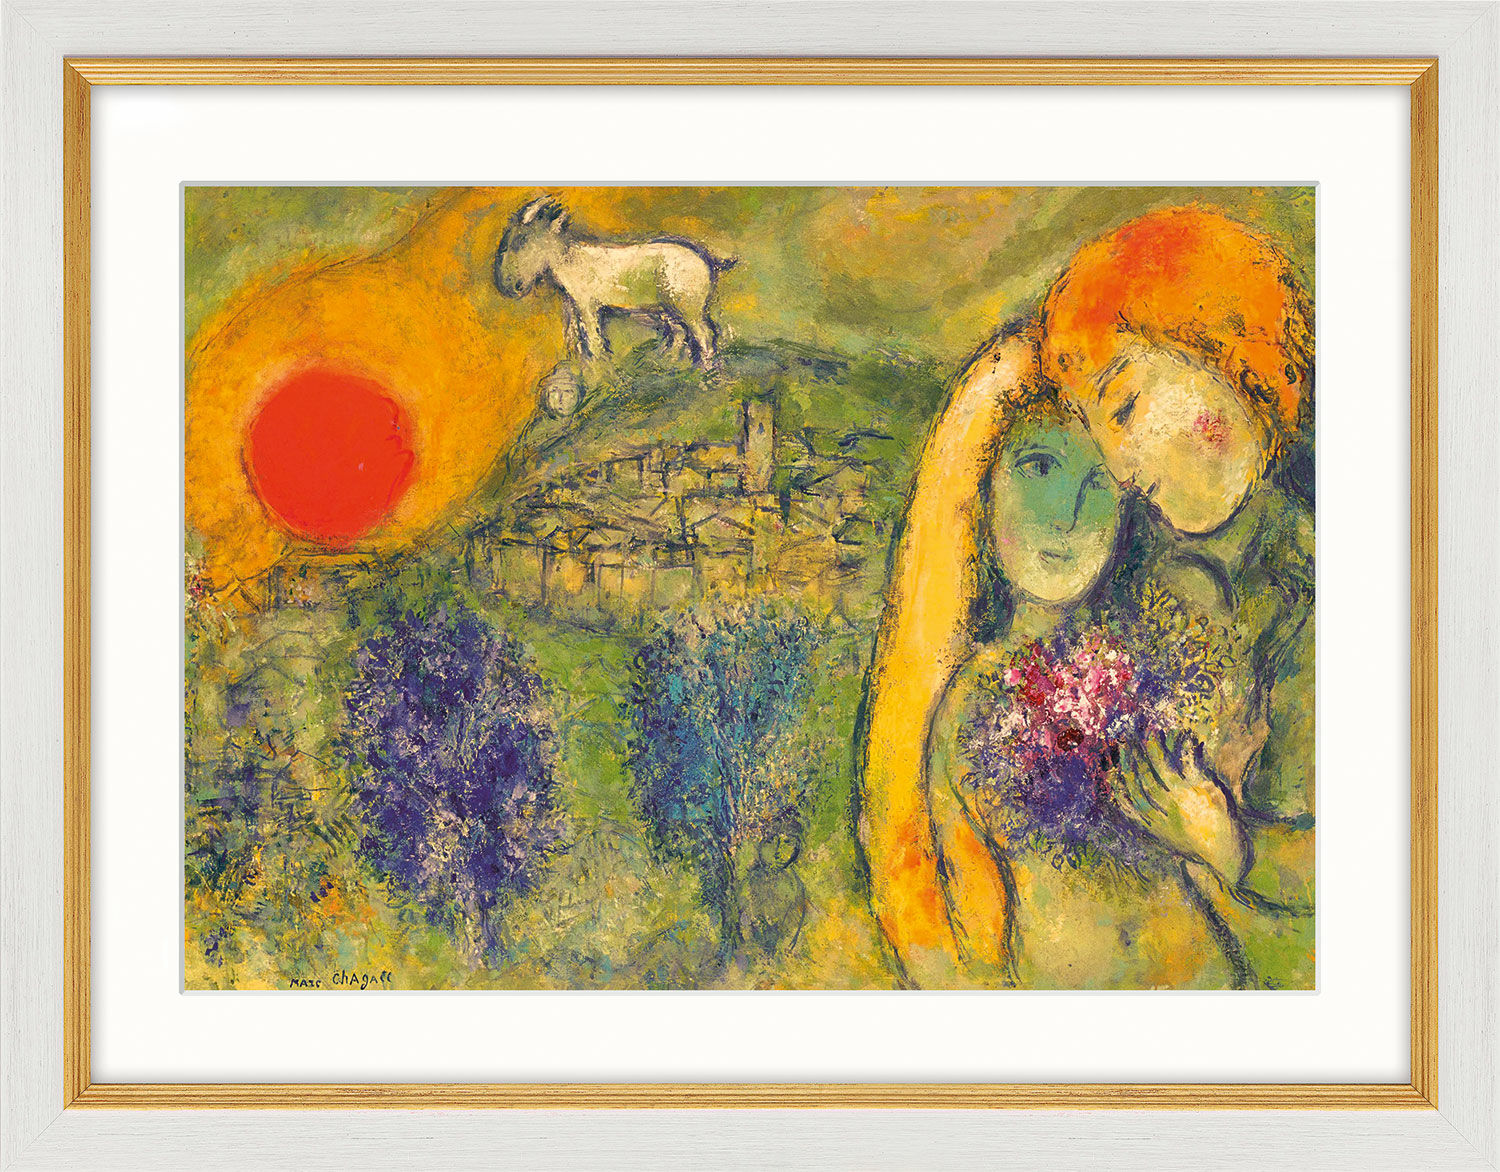 Picture "The Lovers of Vence (Les Amoureux de Vence)" (1957), white and golden framed version by Marc Chagall